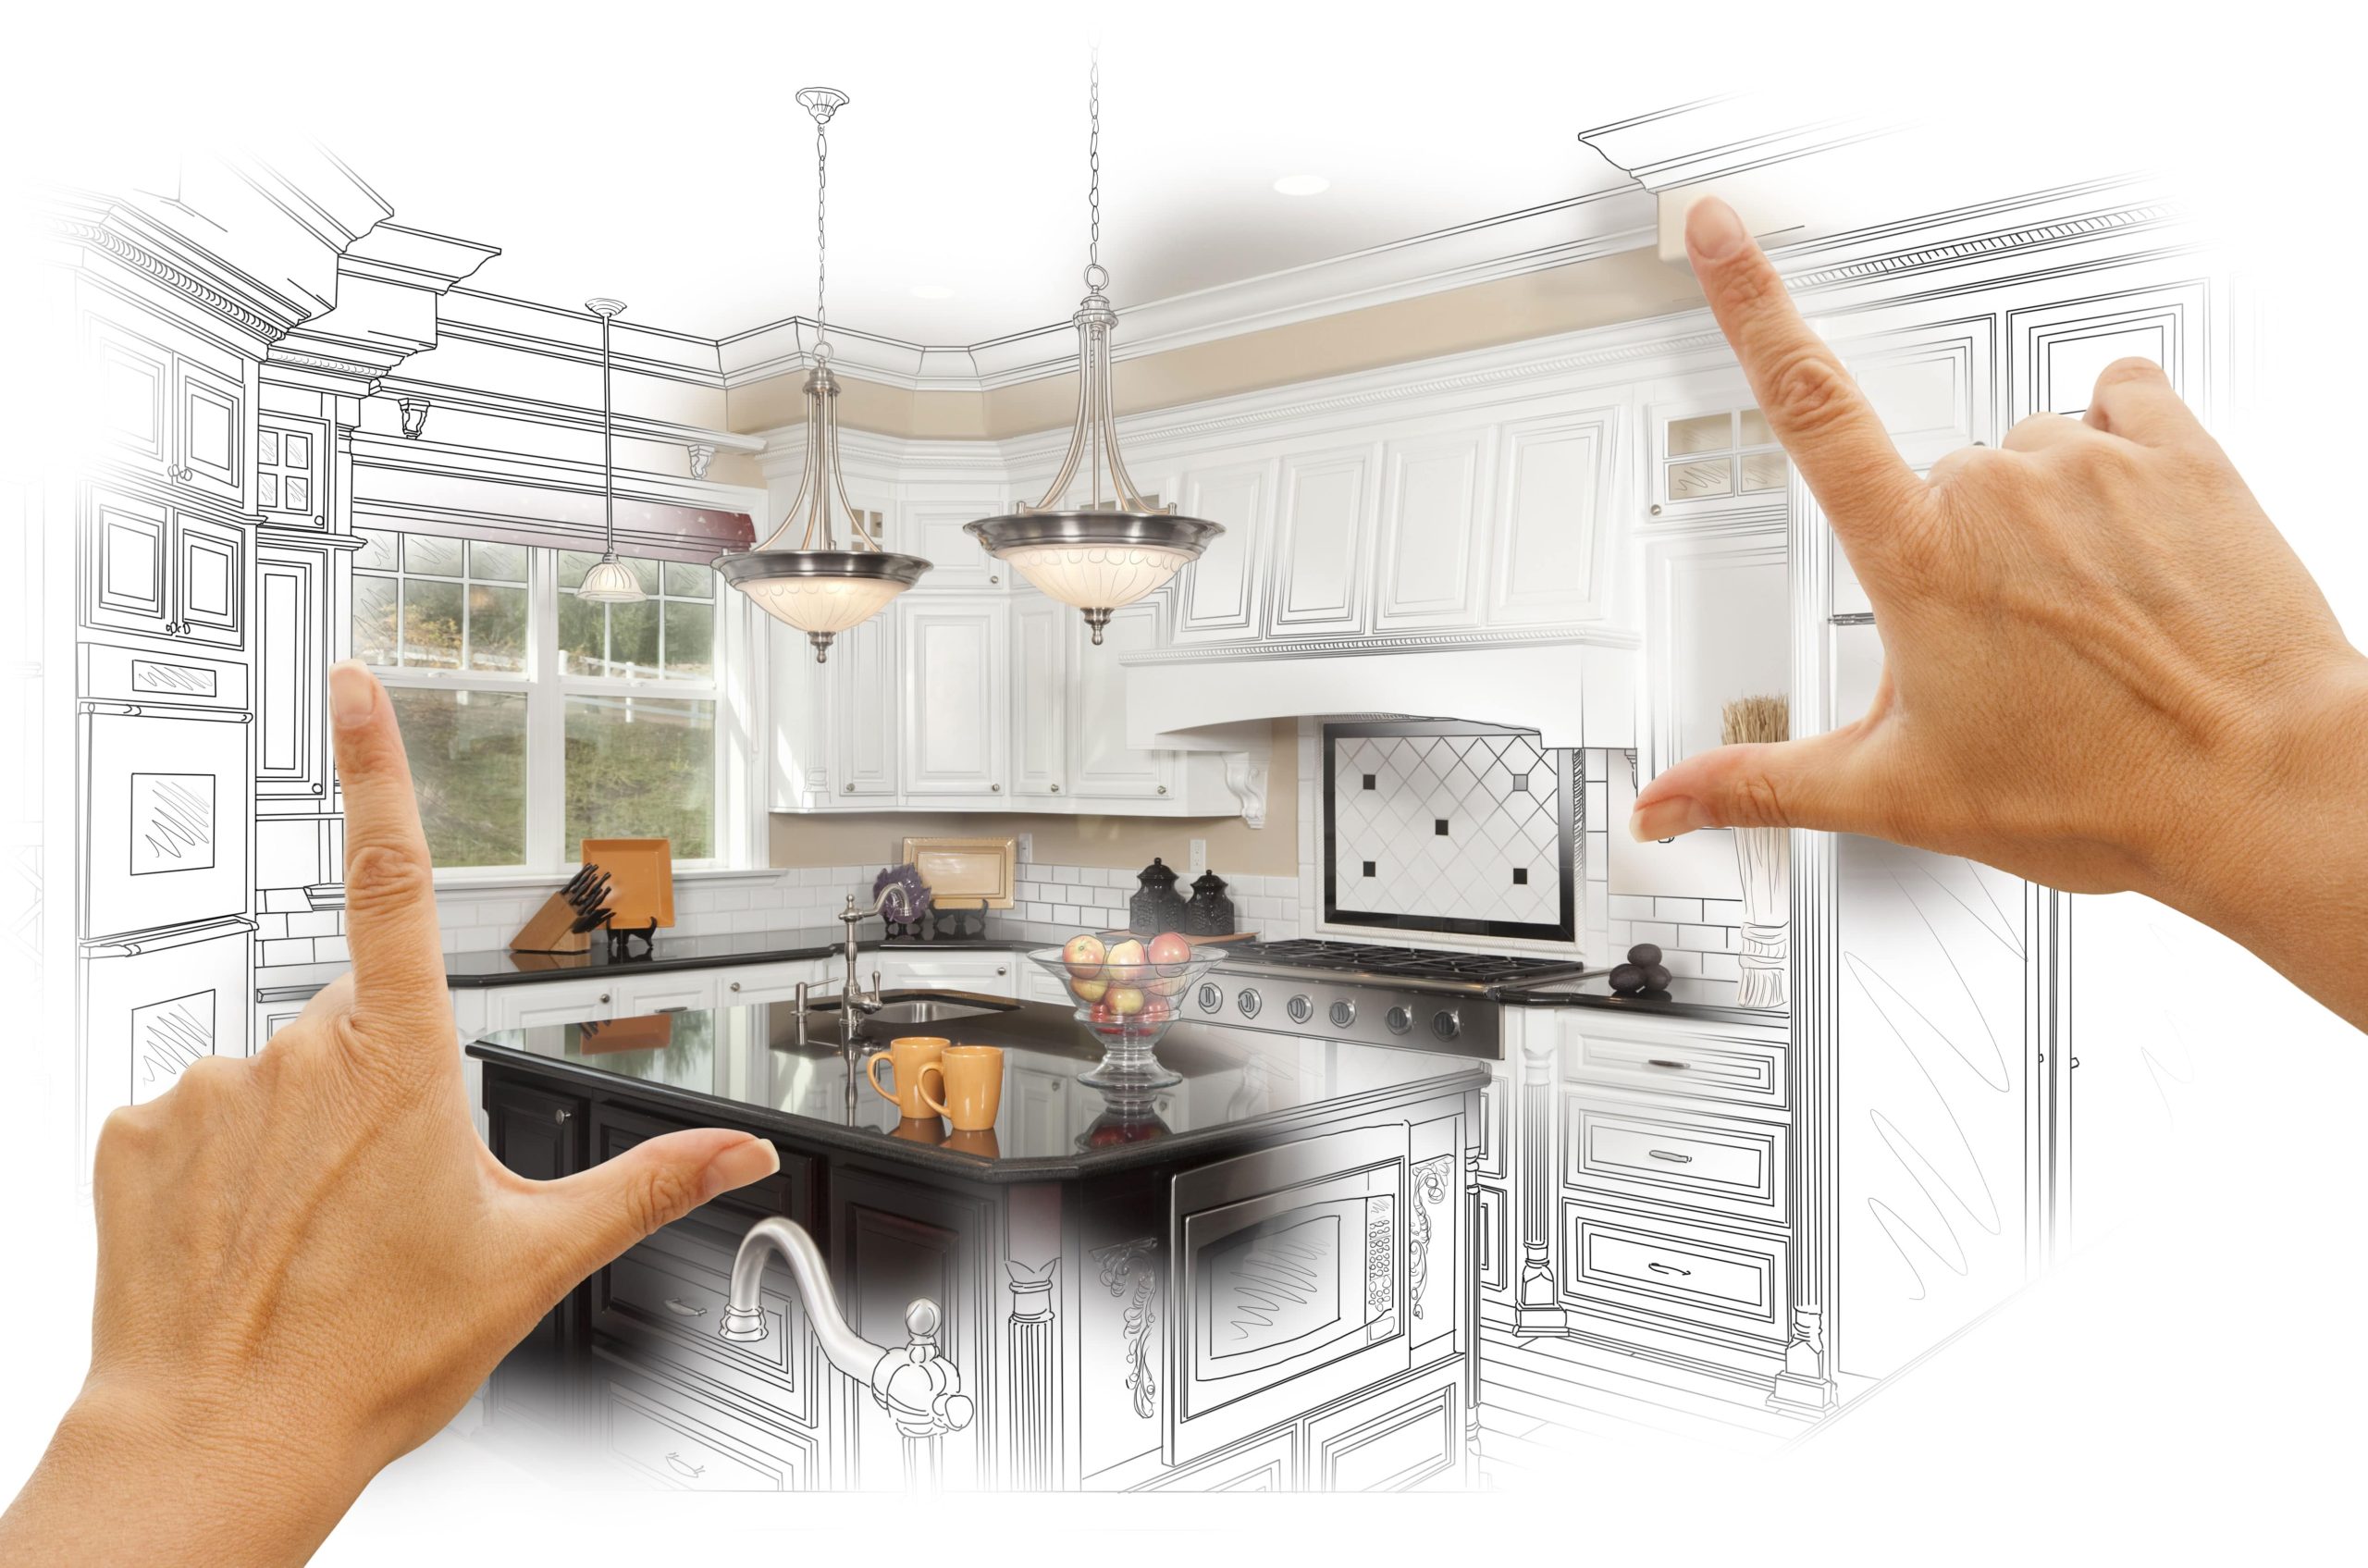 Our specialists in Bakersfield, California help you create a kitchen that reflects your personal style and design.